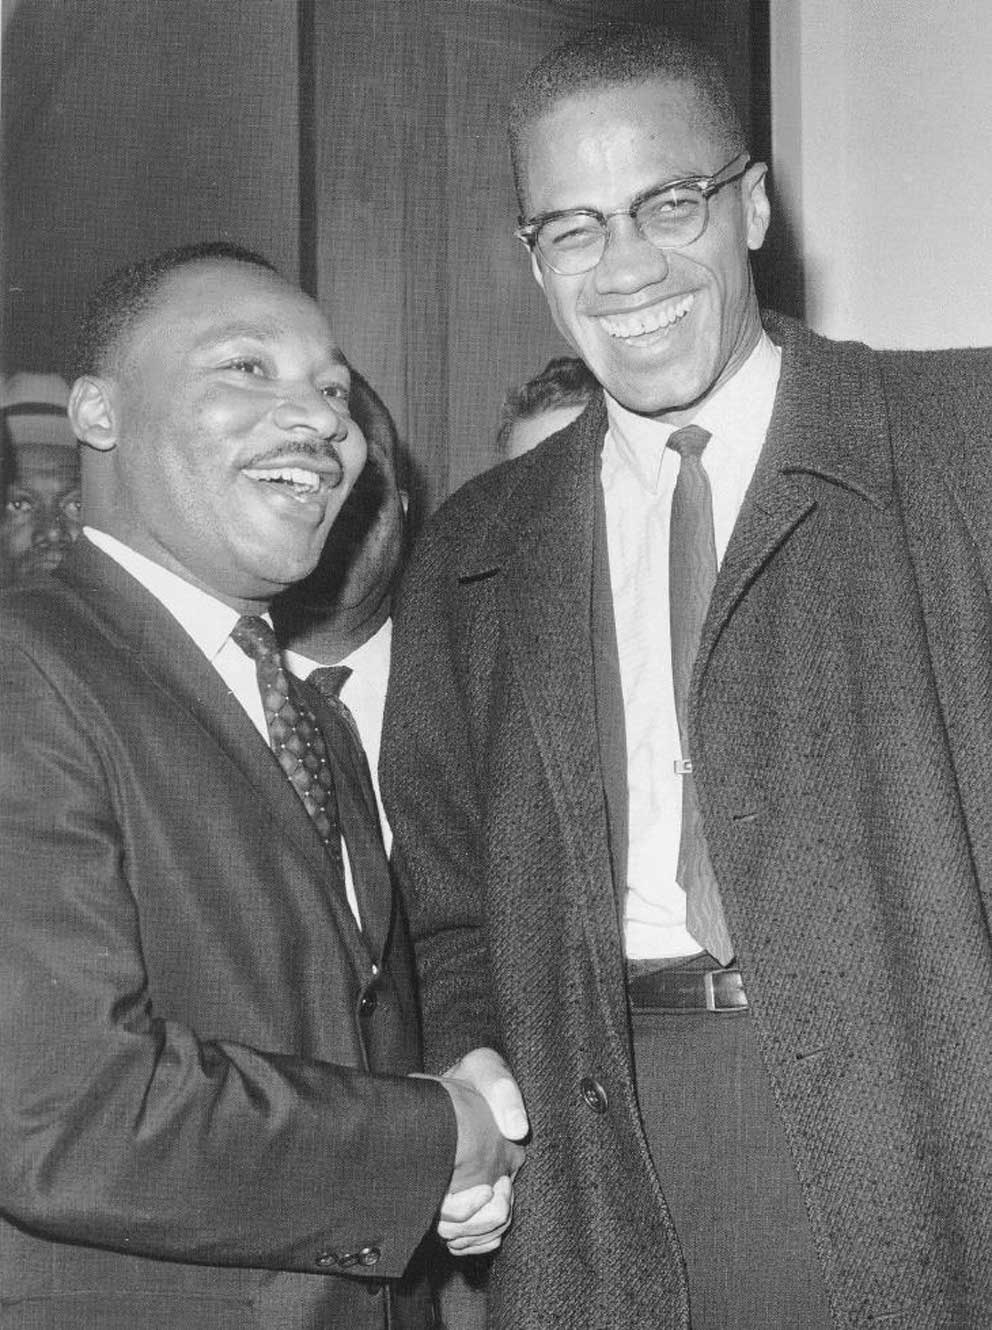 http://muslimmatters.org/wp-content/uploads/martin-luther-king-and-malcolm-x.jpg